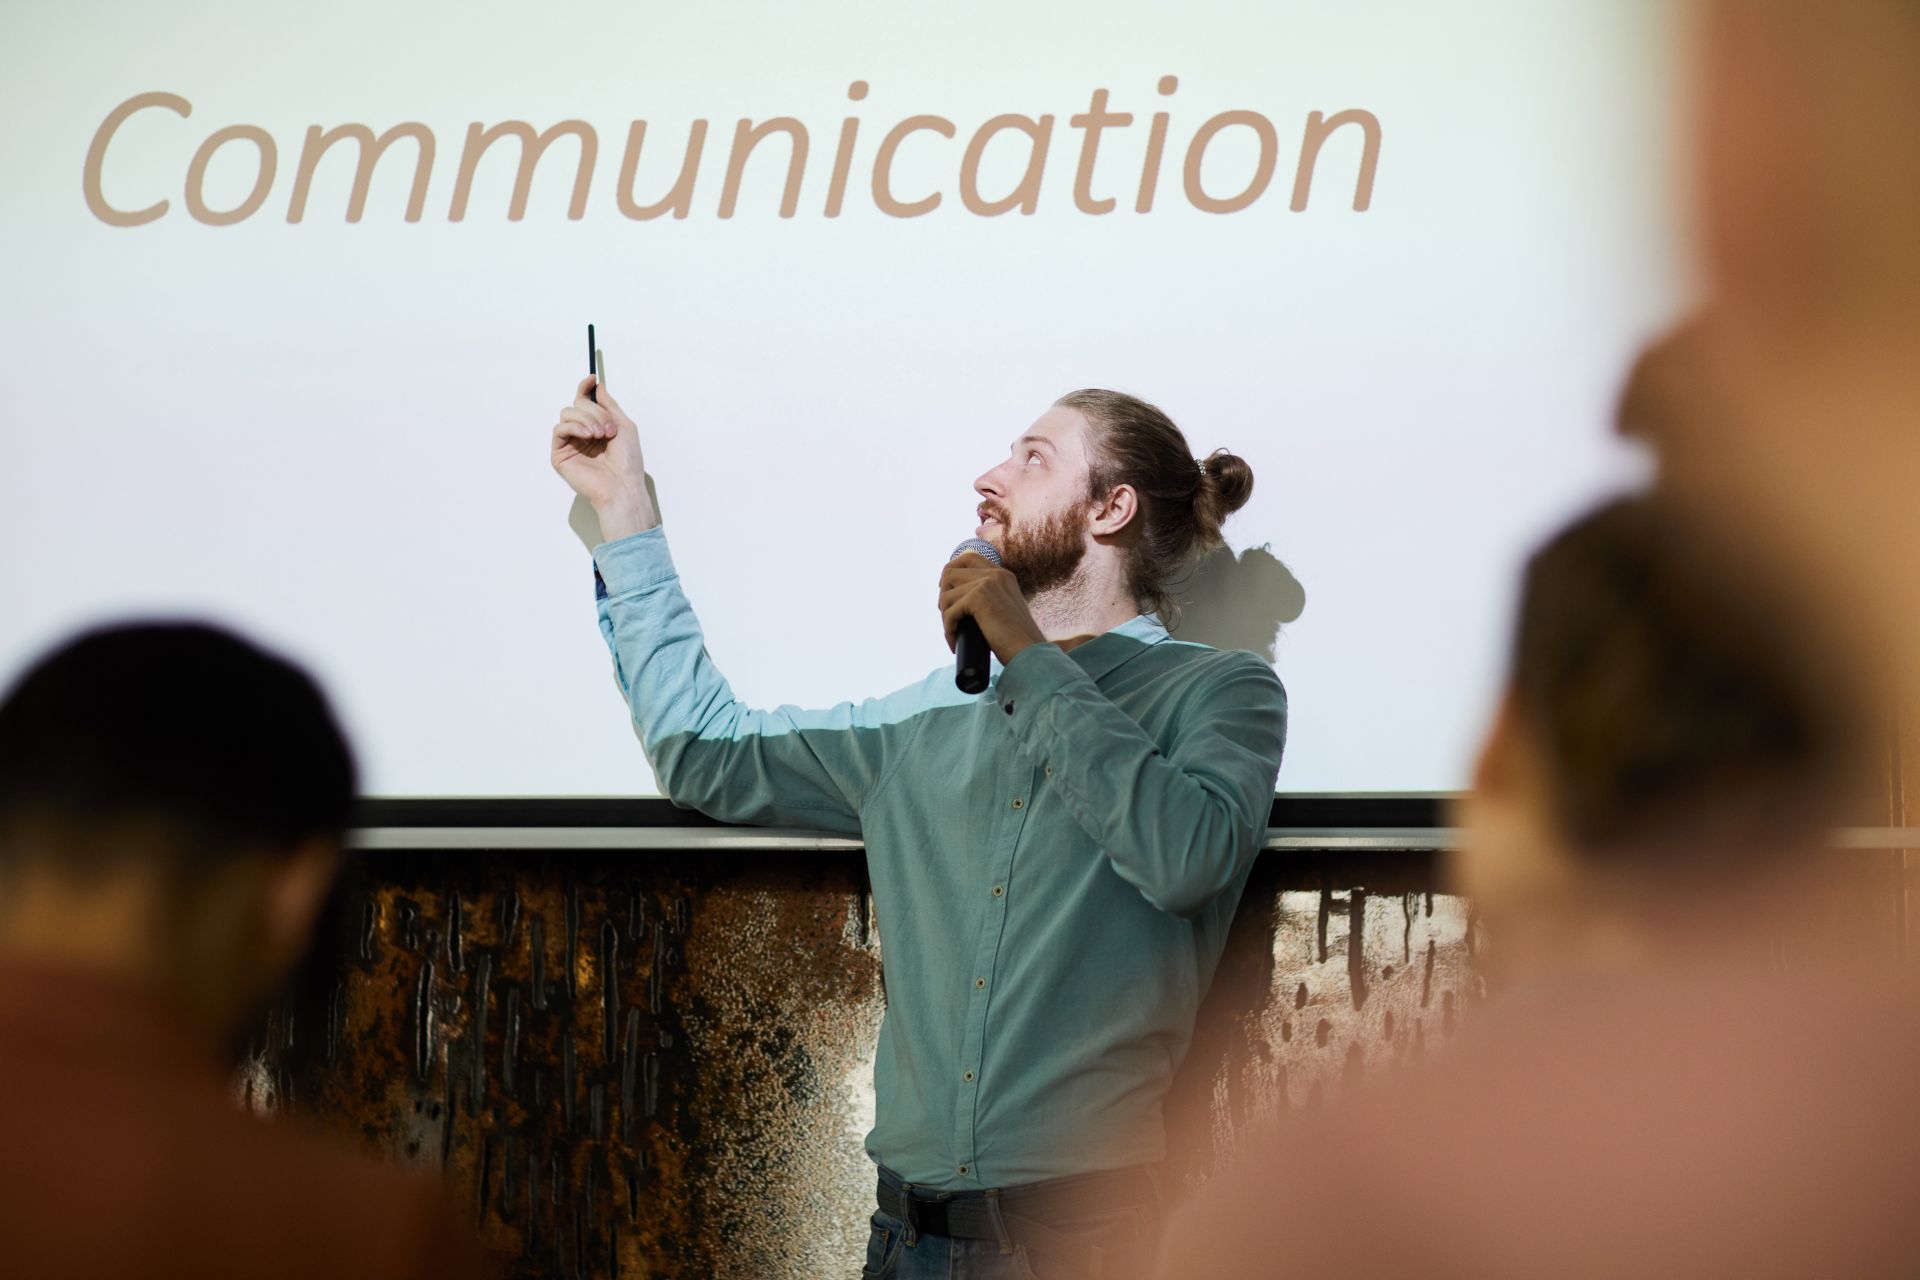 A business man presenting a project on communication.